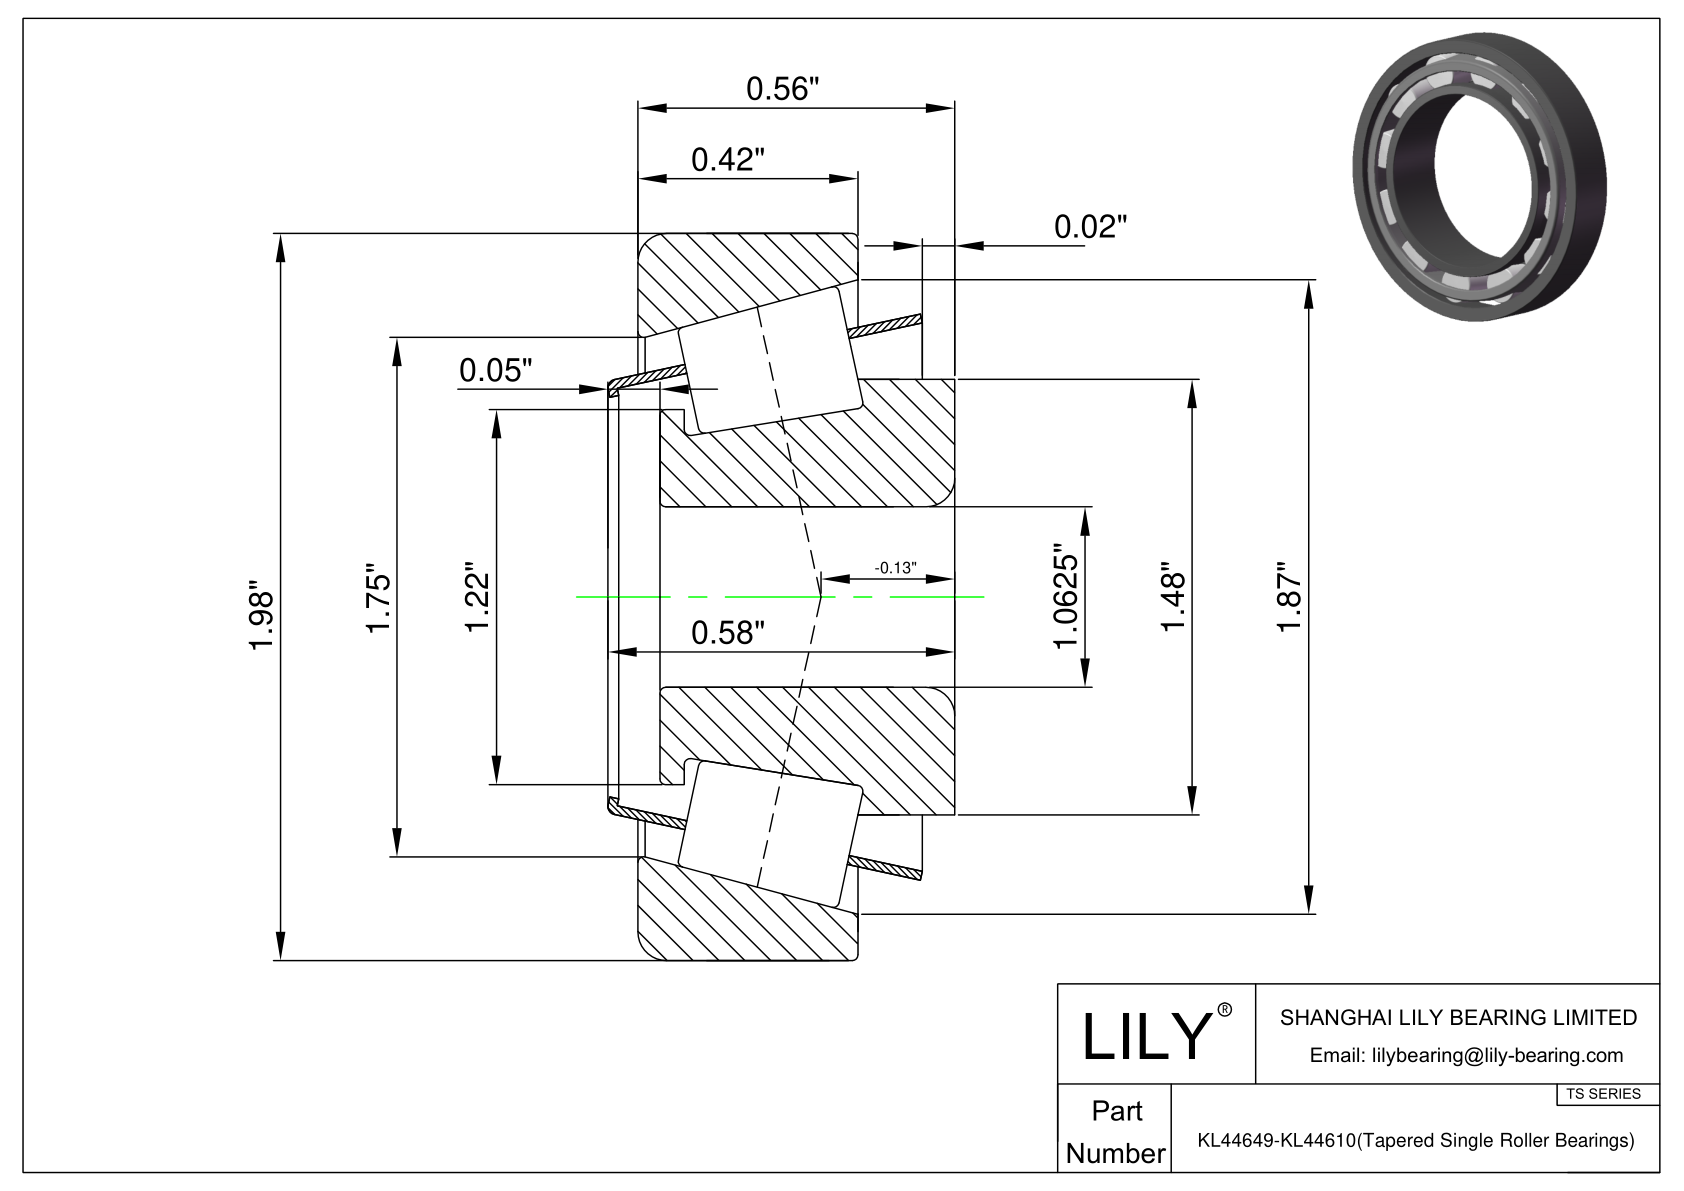 KL44649-KL44610 TS (Tapered Single Roller Bearings) (Imperial) cad drawing